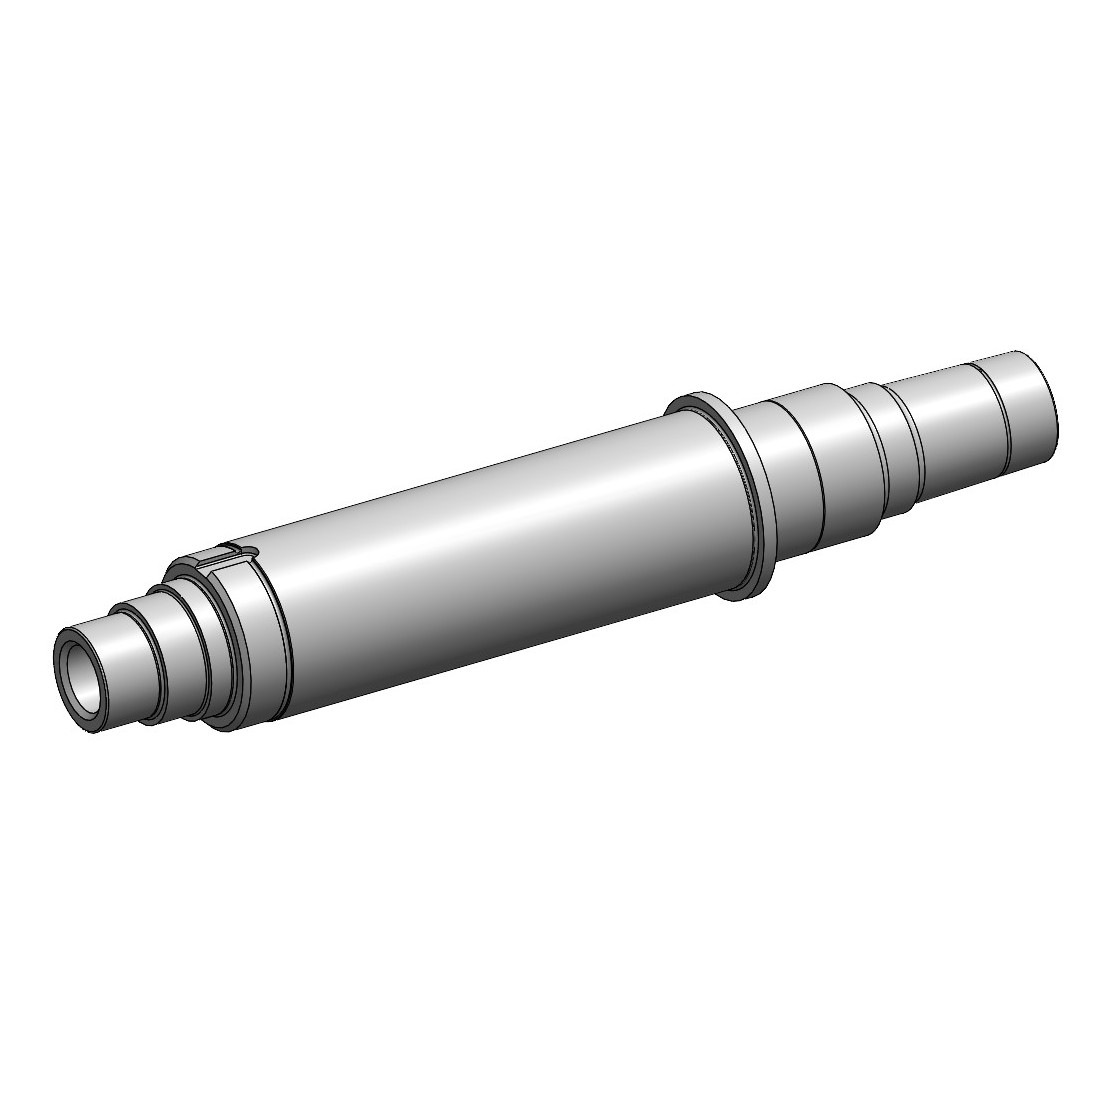 Isometric drawing of rotor shaft.